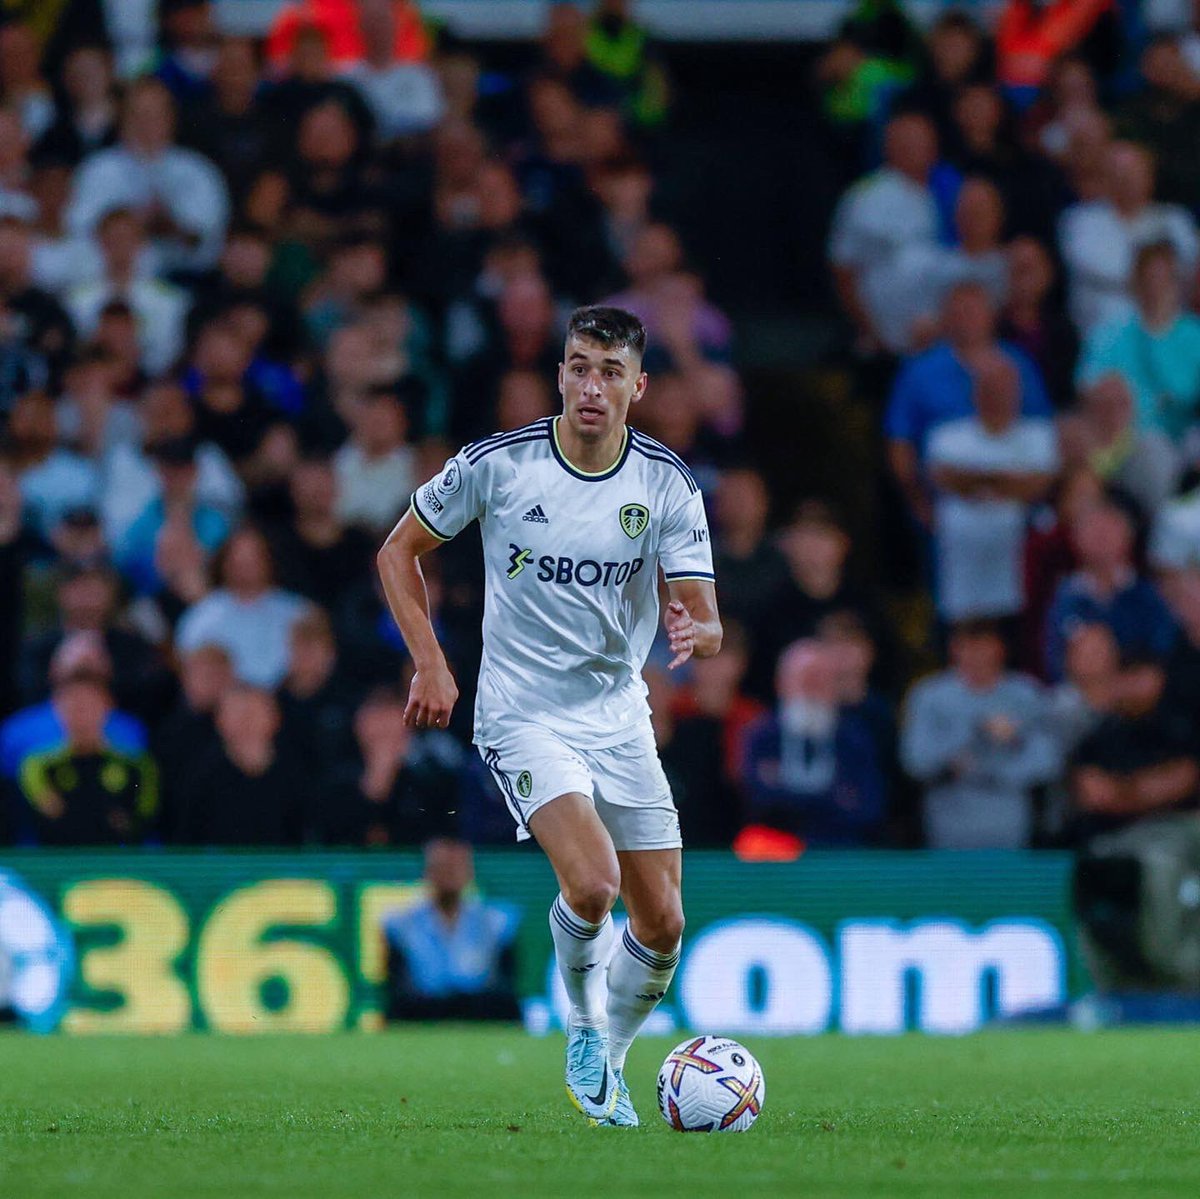 We will keep pushing. Thank you fans, you are amazing. Focus on the next game @LUFC #MOT